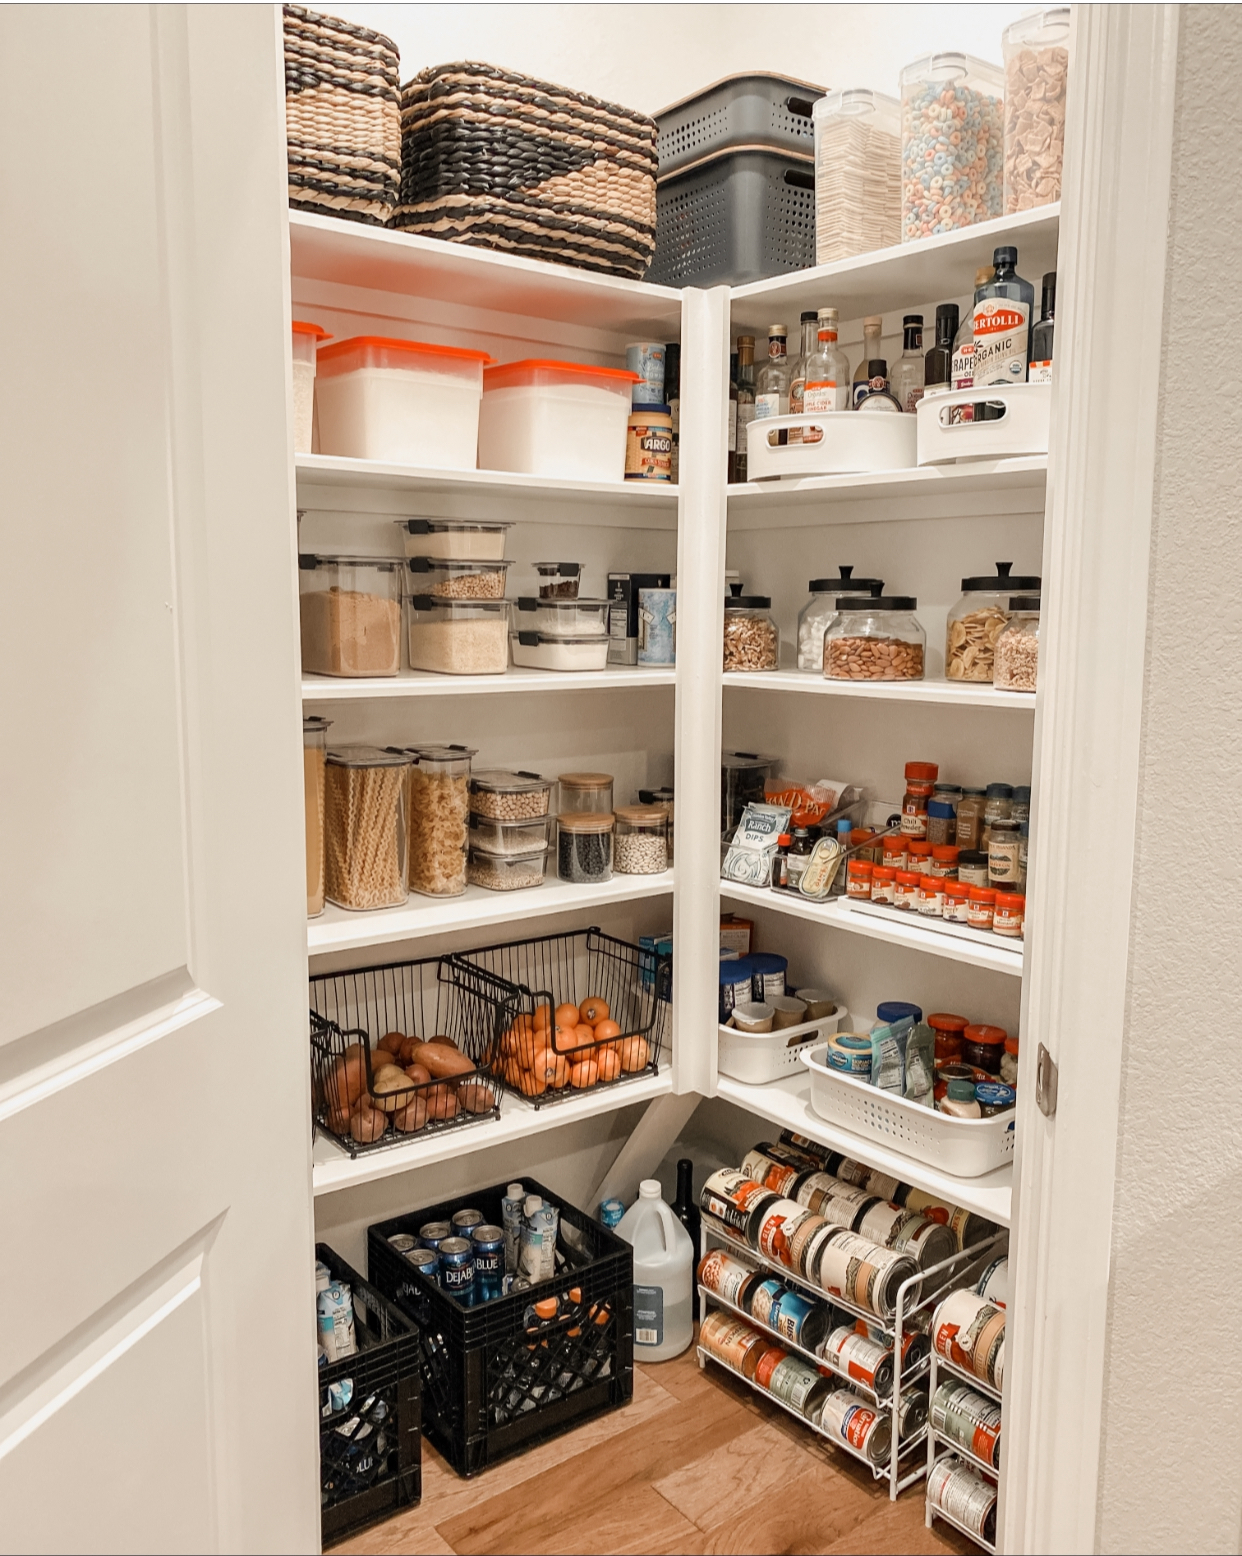 Useful Pantry Organizers to Help Save Time in the Kitchen - Meatball Mom